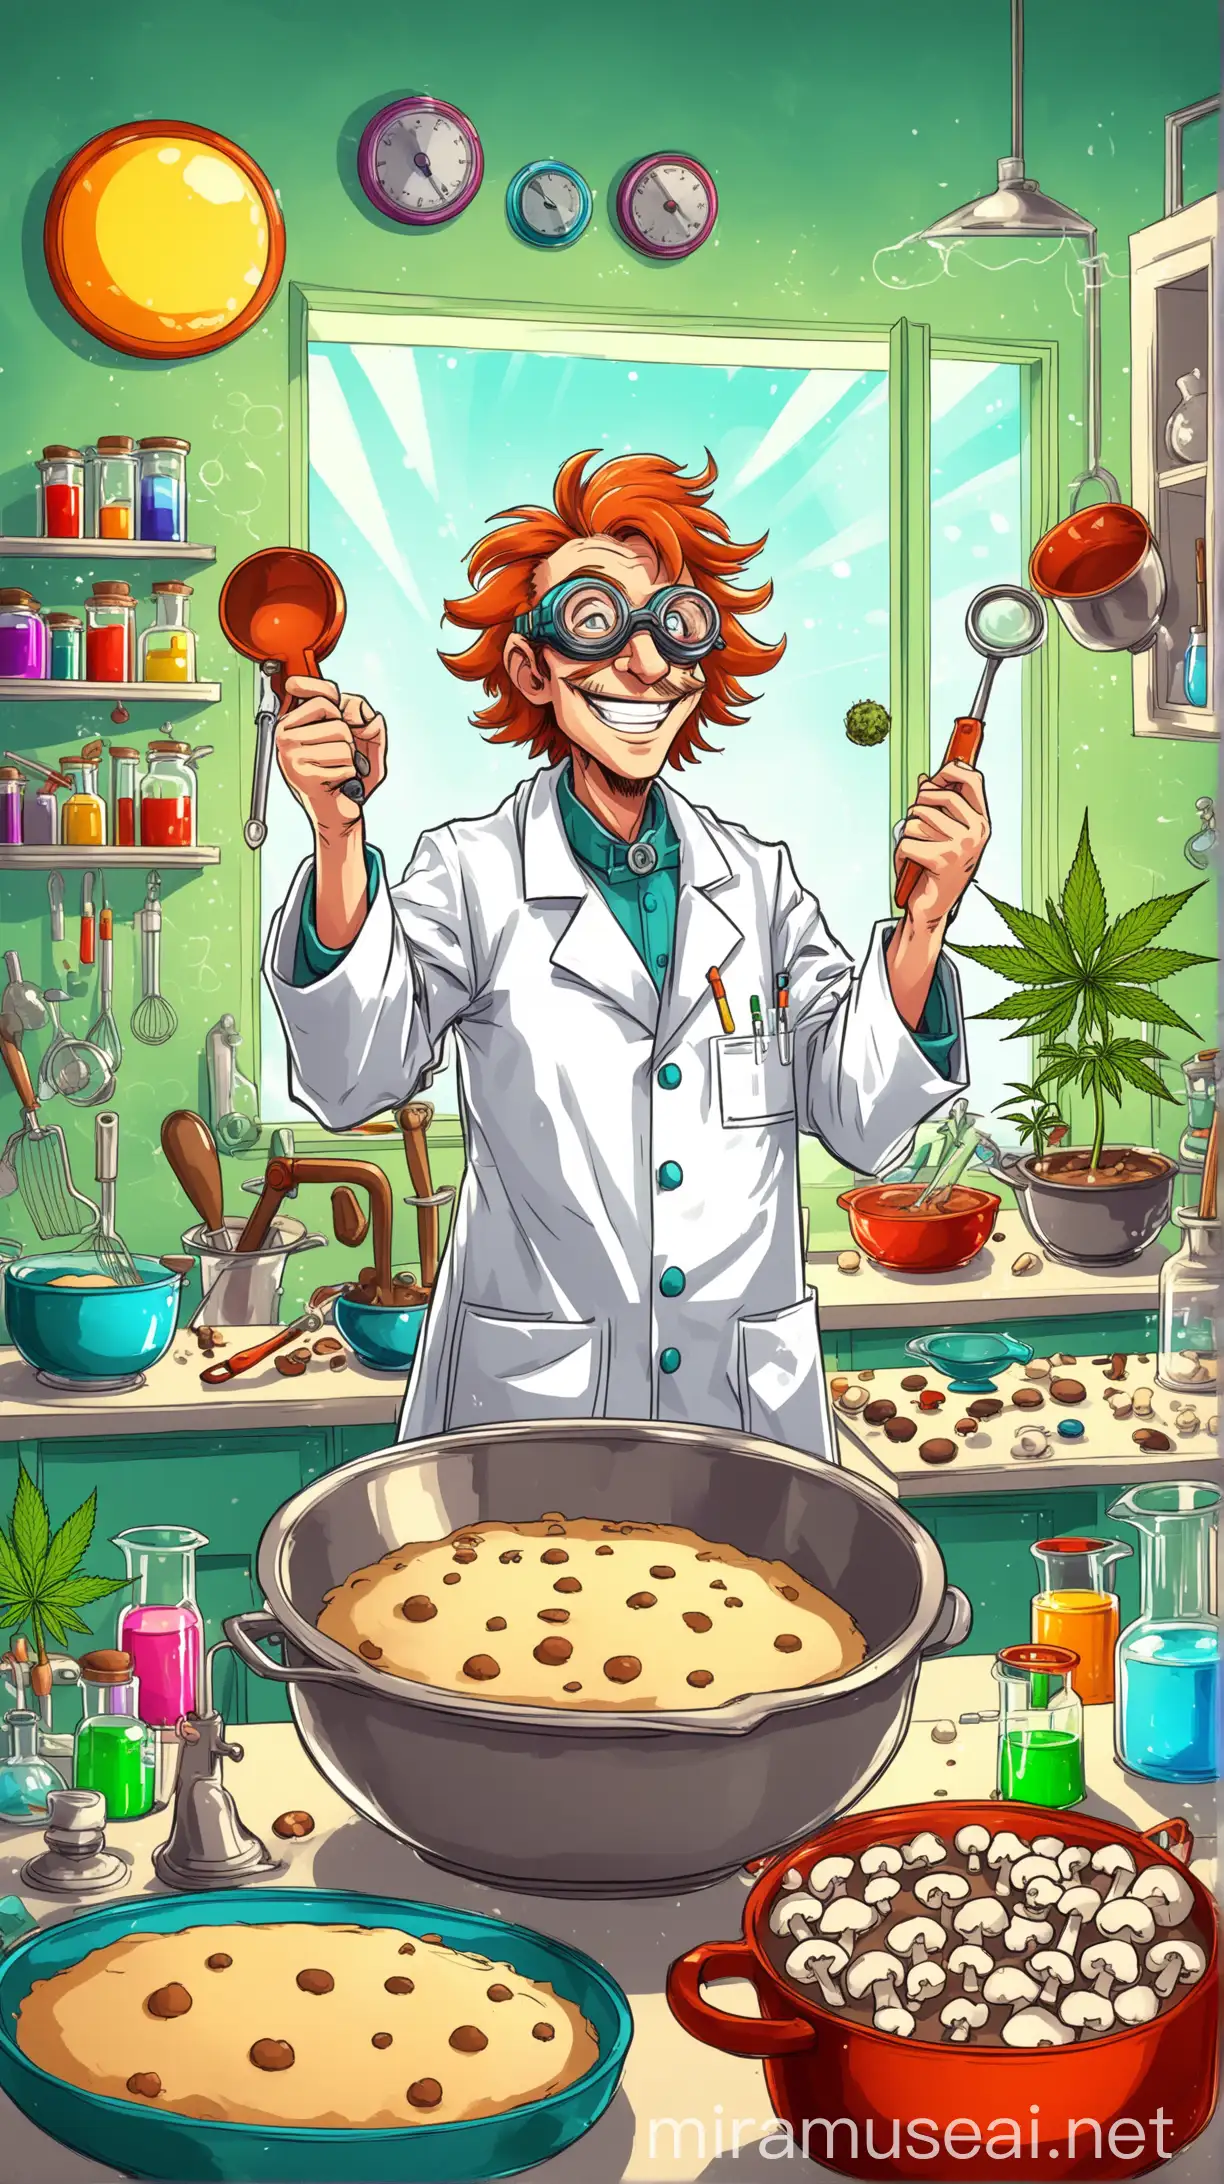 Subject: The main subject of the image is a happy mad scientist, depicted in a vibrant cartoon style. The scientist is shown wearing a lab coat and goggles, with a joyful expression on their face.
Setting: The scene takes place in a bright and sunny kitchen, providing a cheerful atmosphere. There are baking ingredients scattered around the kitchen, including Desserts like cakes etc, and cannabis plants, contributing to the whimsical nature of the image.
Background: The background features kitchen elements such as countertops, cabinets, and cooking utensils, all bathed in sunlight to enhance the cheerful mood.
Style/Coloring: The image is created in a cartoon-style with vibrant colors, adding to the lively and playful tone. The colors used are bold and eye-catching, drawing the viewer's attention to the various elements in the scene.
Action: The mad scientist is shown actively engaged in baking, perhaps mixing ingredients or placing cookies in the oven, conveying a sense of excitement and creativity.
Items: The scene includes various baking items such as mixing bowls, measuring cups, and baking trays, as well as whimsical elements like oversized mushrooms and cannabis plants, adding a touch of fantasy to the image.
Costume/Appearance: The mad scientist is dressed in a classic lab coat and wears goggles, typical attire for a scientist. Their appearance is quirky and eccentric, reflecting their character.
Accessories: The scientist may have additional accessories such as test tubes, beakers, or a quirky hairstyle, further emphasizing their role as a mad scientist.
